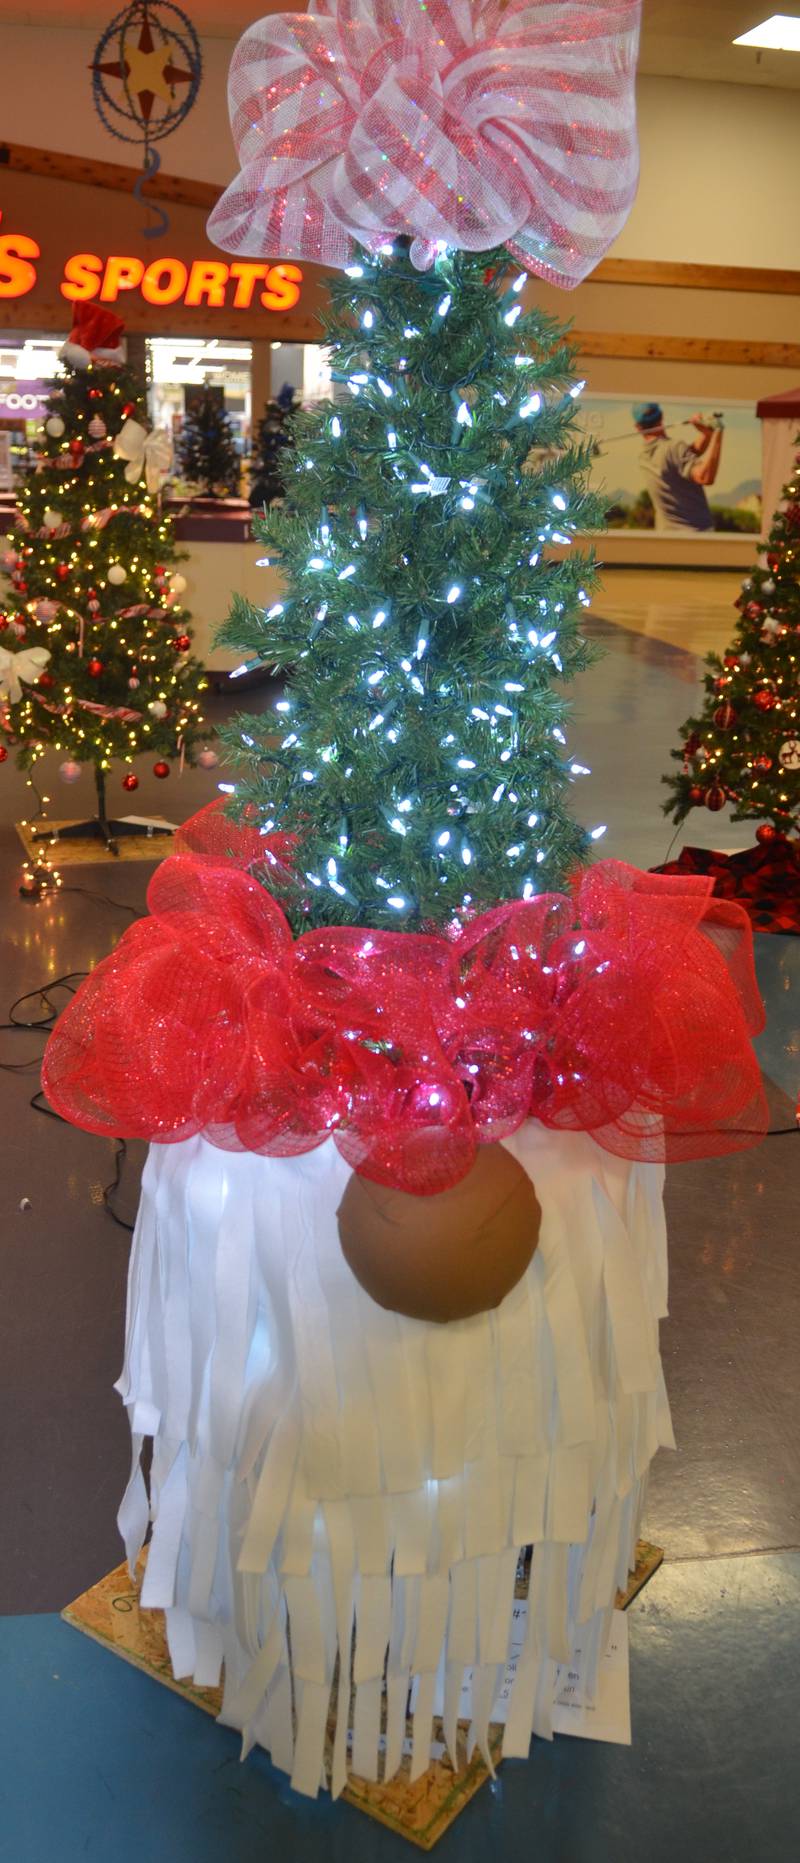 The Sterling Police Department's gnome-themed Christmas tree stands ready to greet visitors to the Festival of Trees at Northland Mall in Sterling.